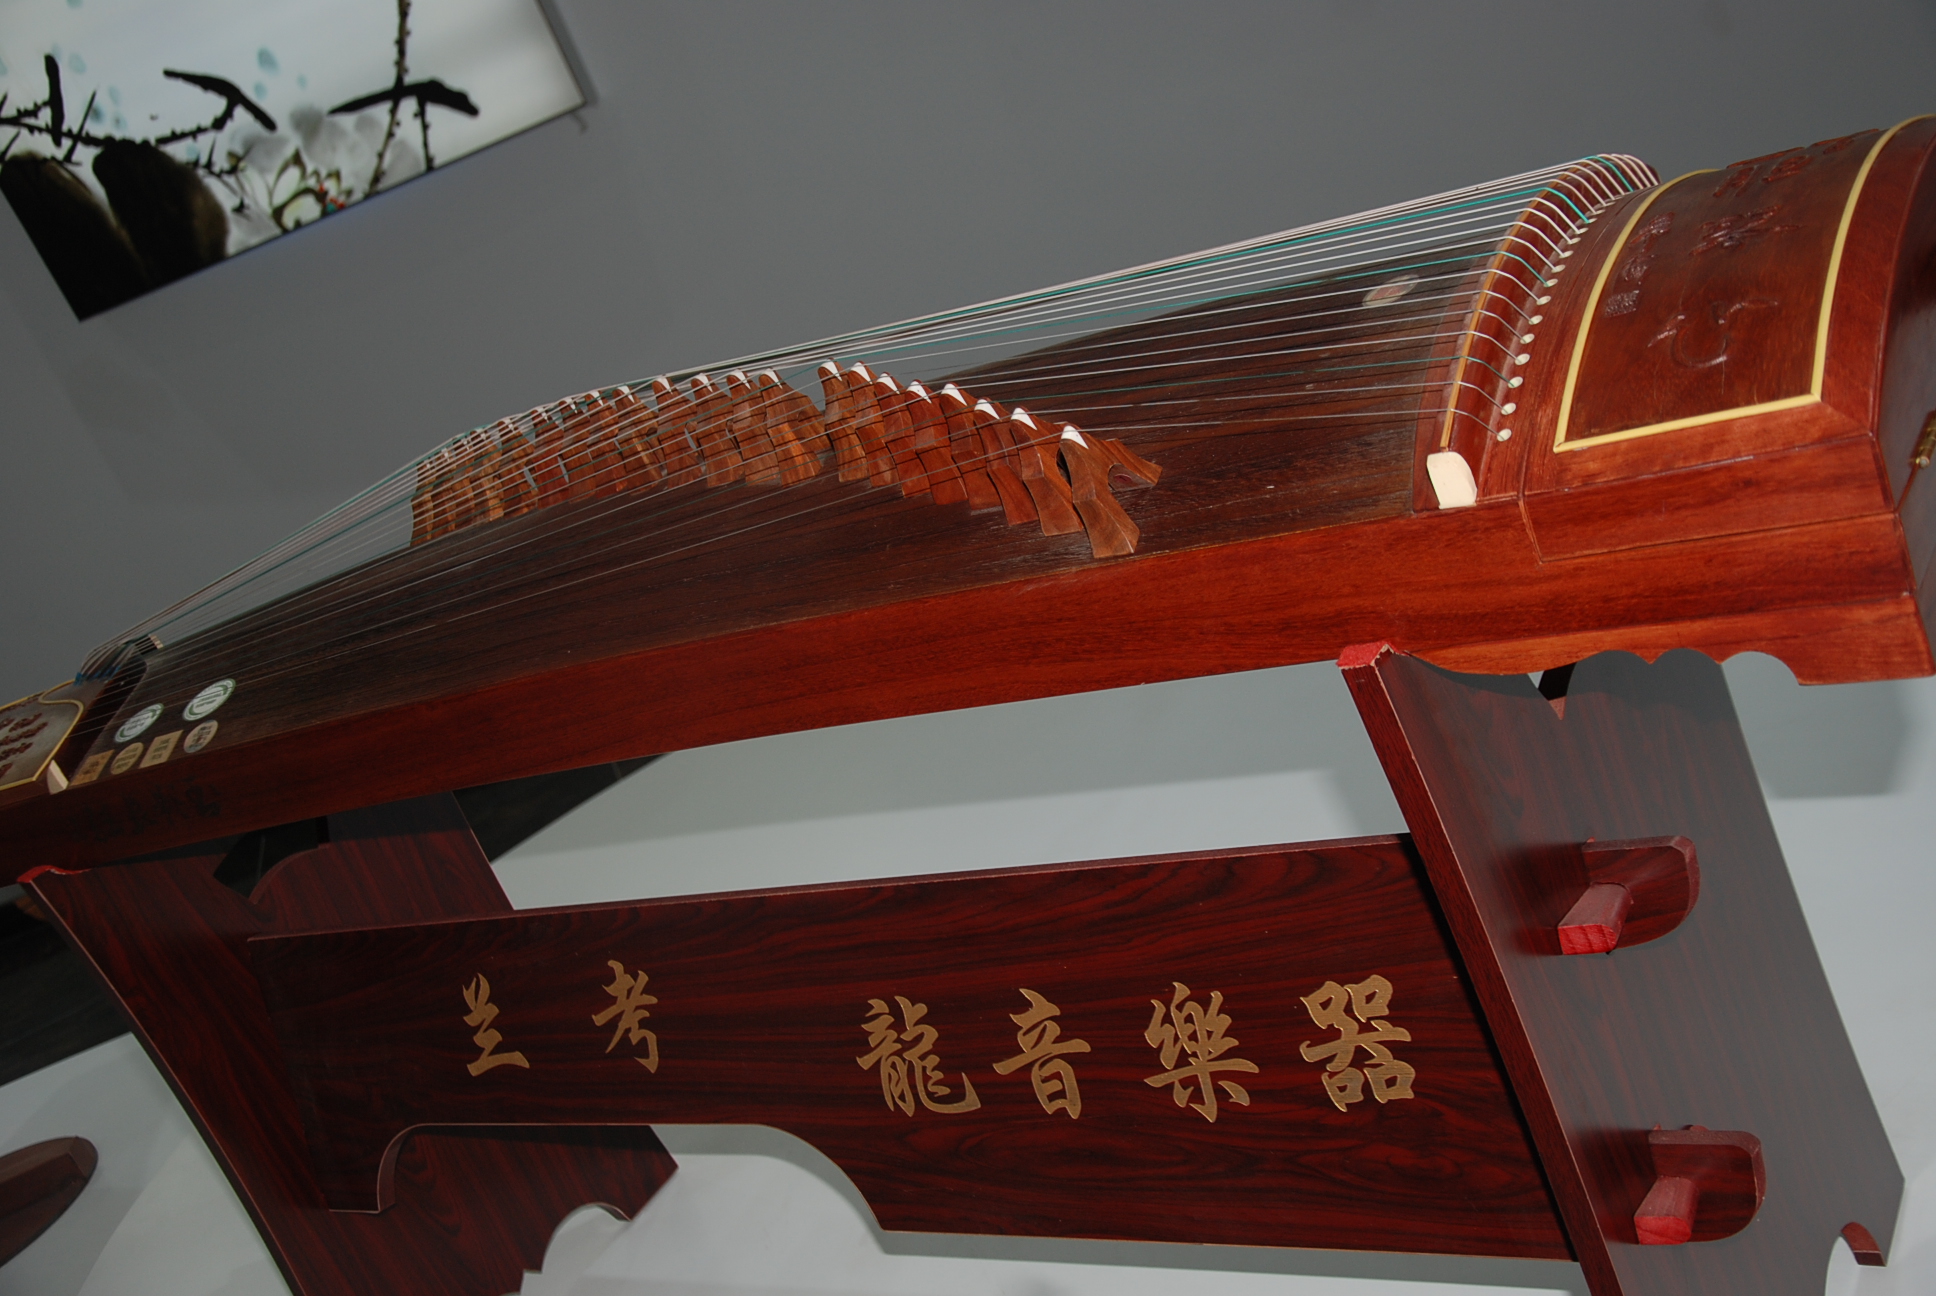 The Chinese zither made in Lankao County [Photo: China Plus]